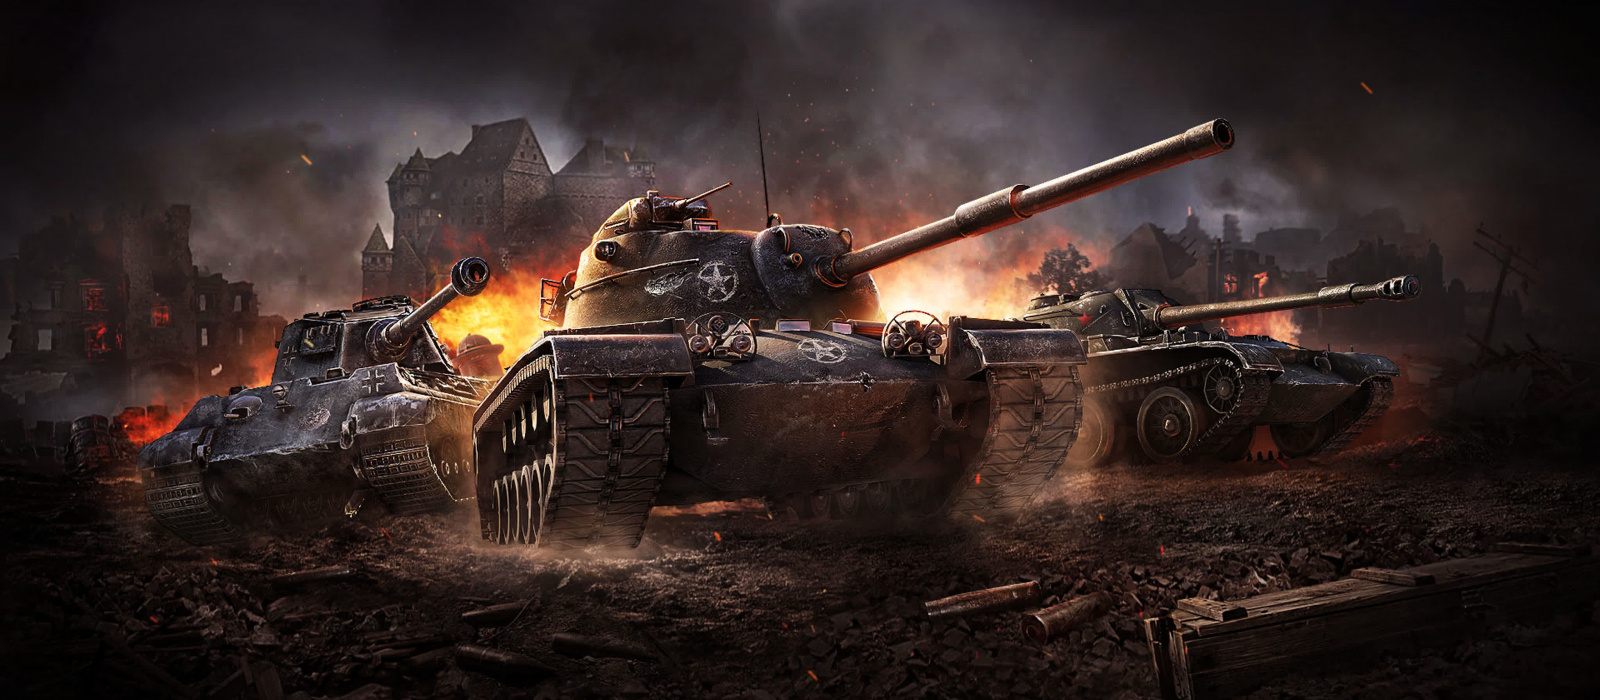 Bonus codes and invite codes for World of Tanks (January 2023) - in-game gold, credits, vehicles or premium account